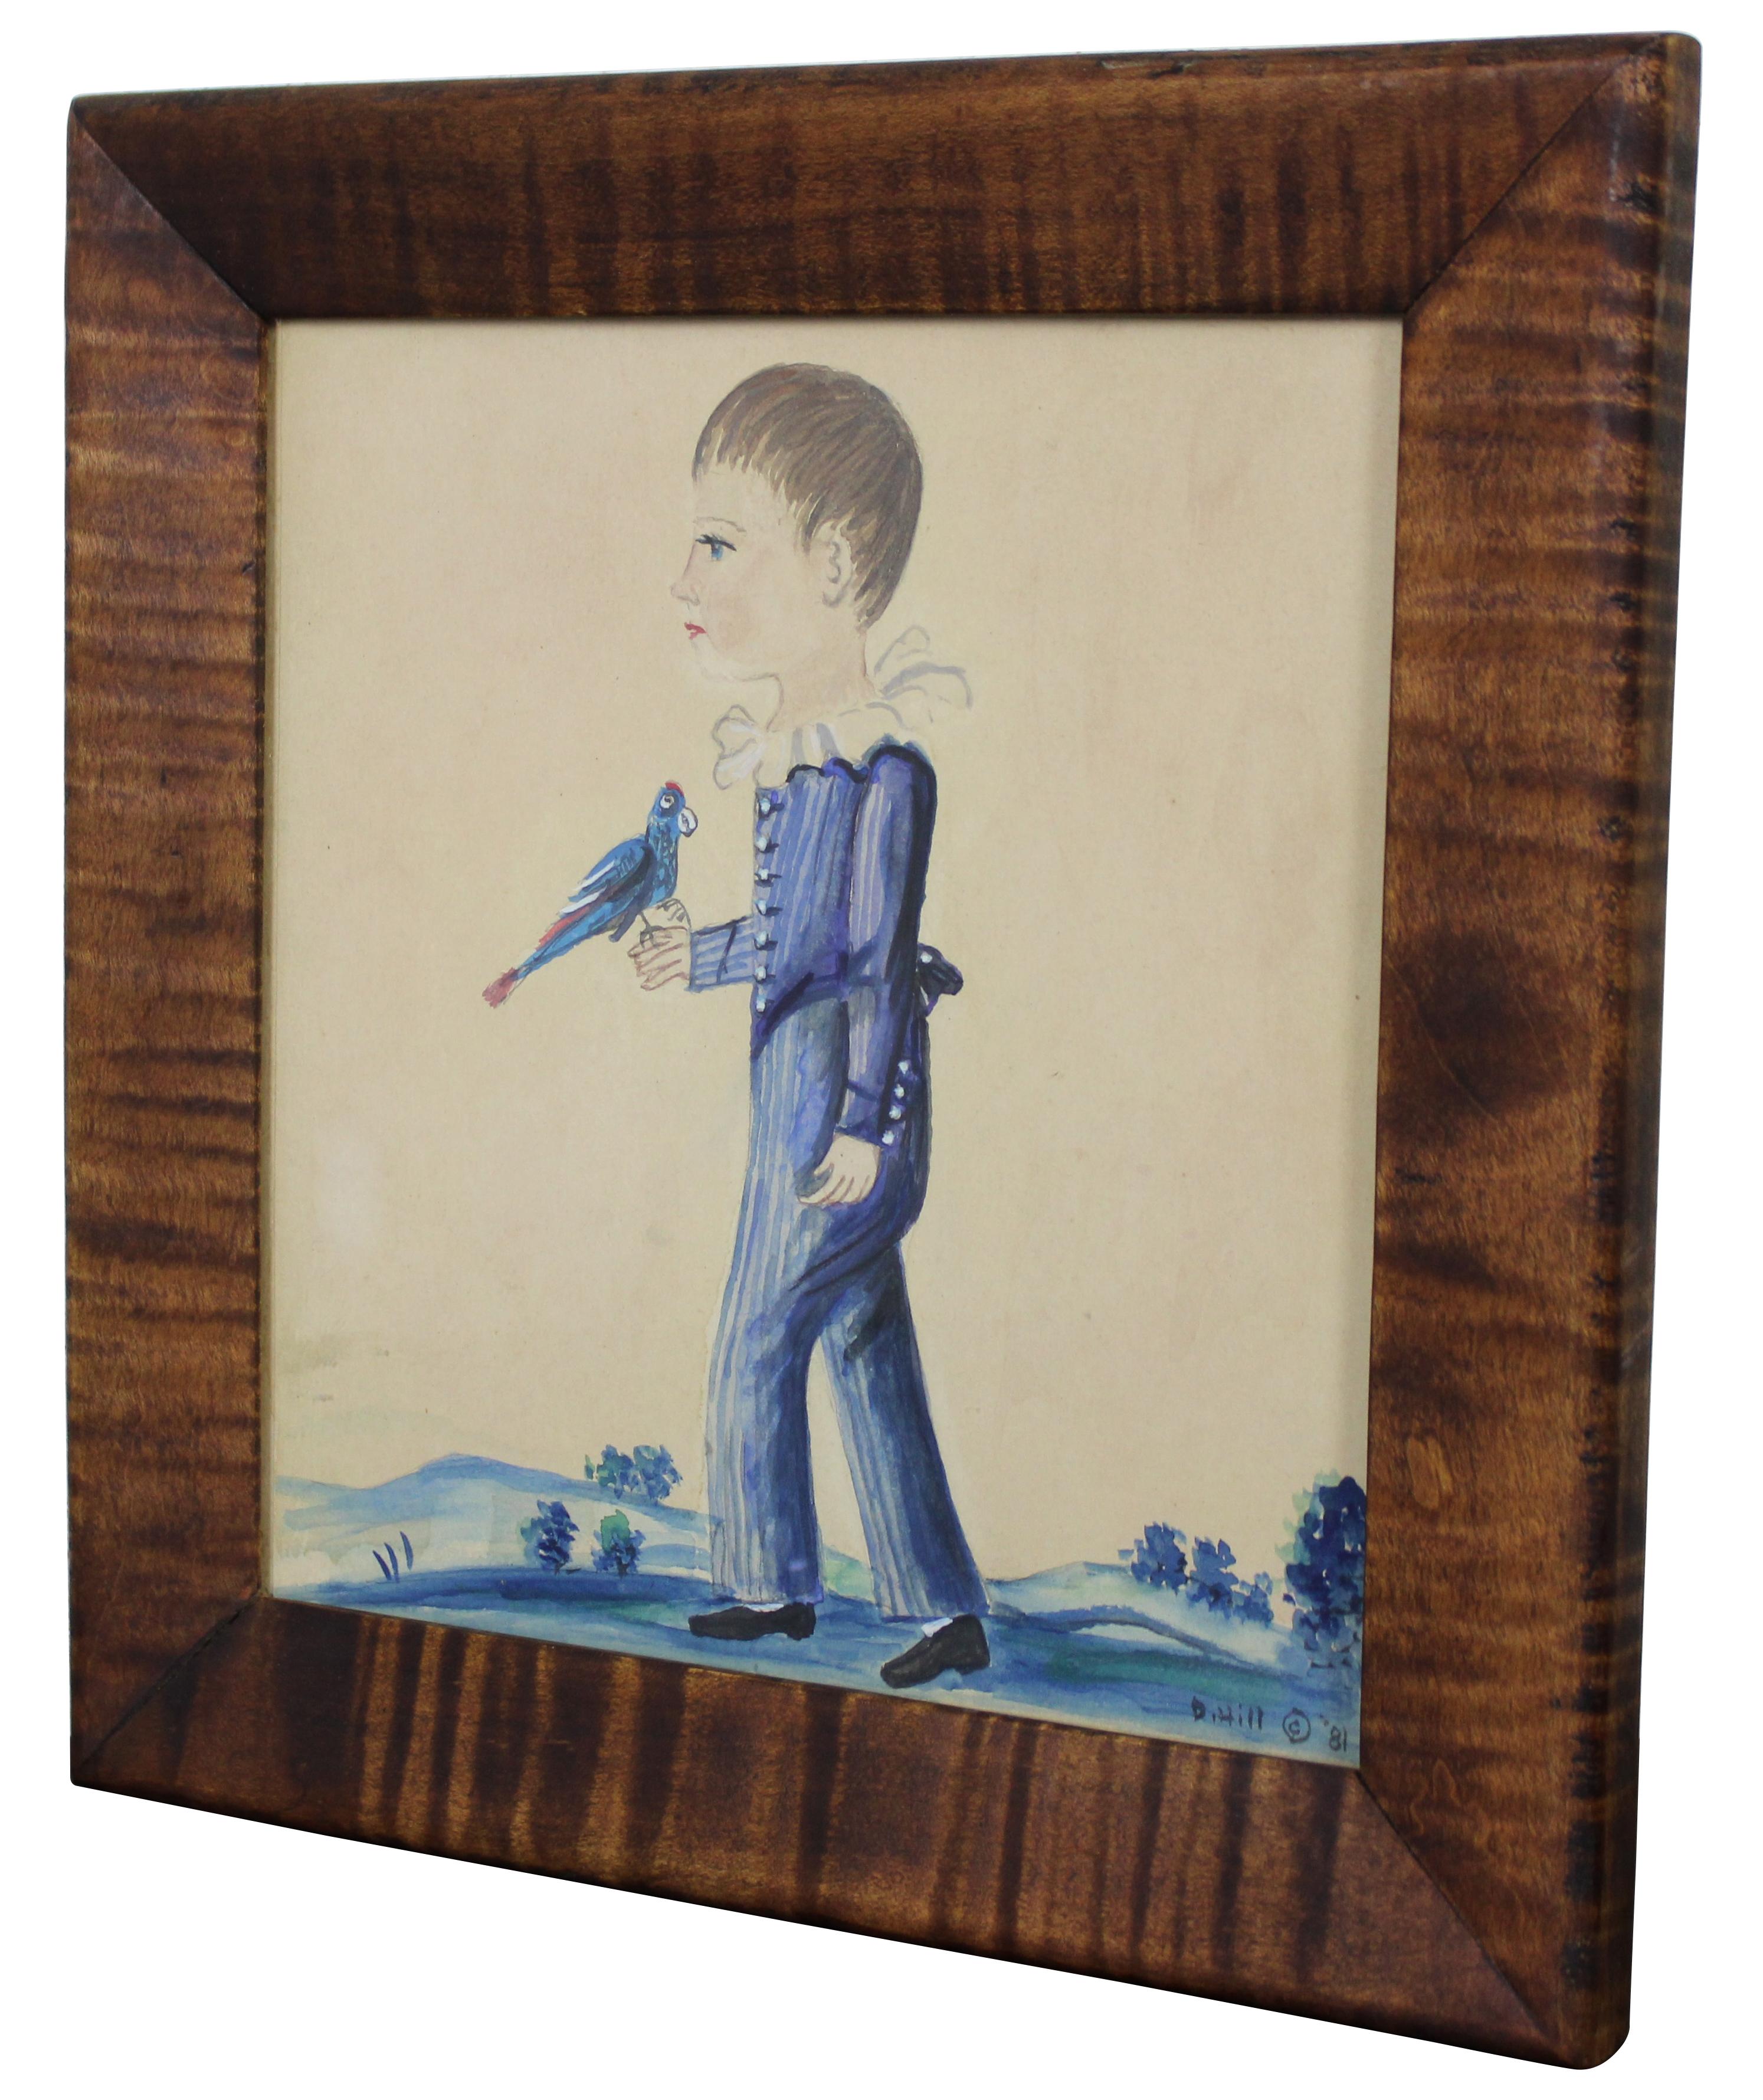 Vintage 1981 Folk Art style watercolor portrait painting of a young boy in blue holding a blue bird or parrot. Signed D. Hill in lower right corner.

Measures: 10.5” x 0.75” x 11” / Sans Frame - 7.5” x 8” (Width x Depth x Height).